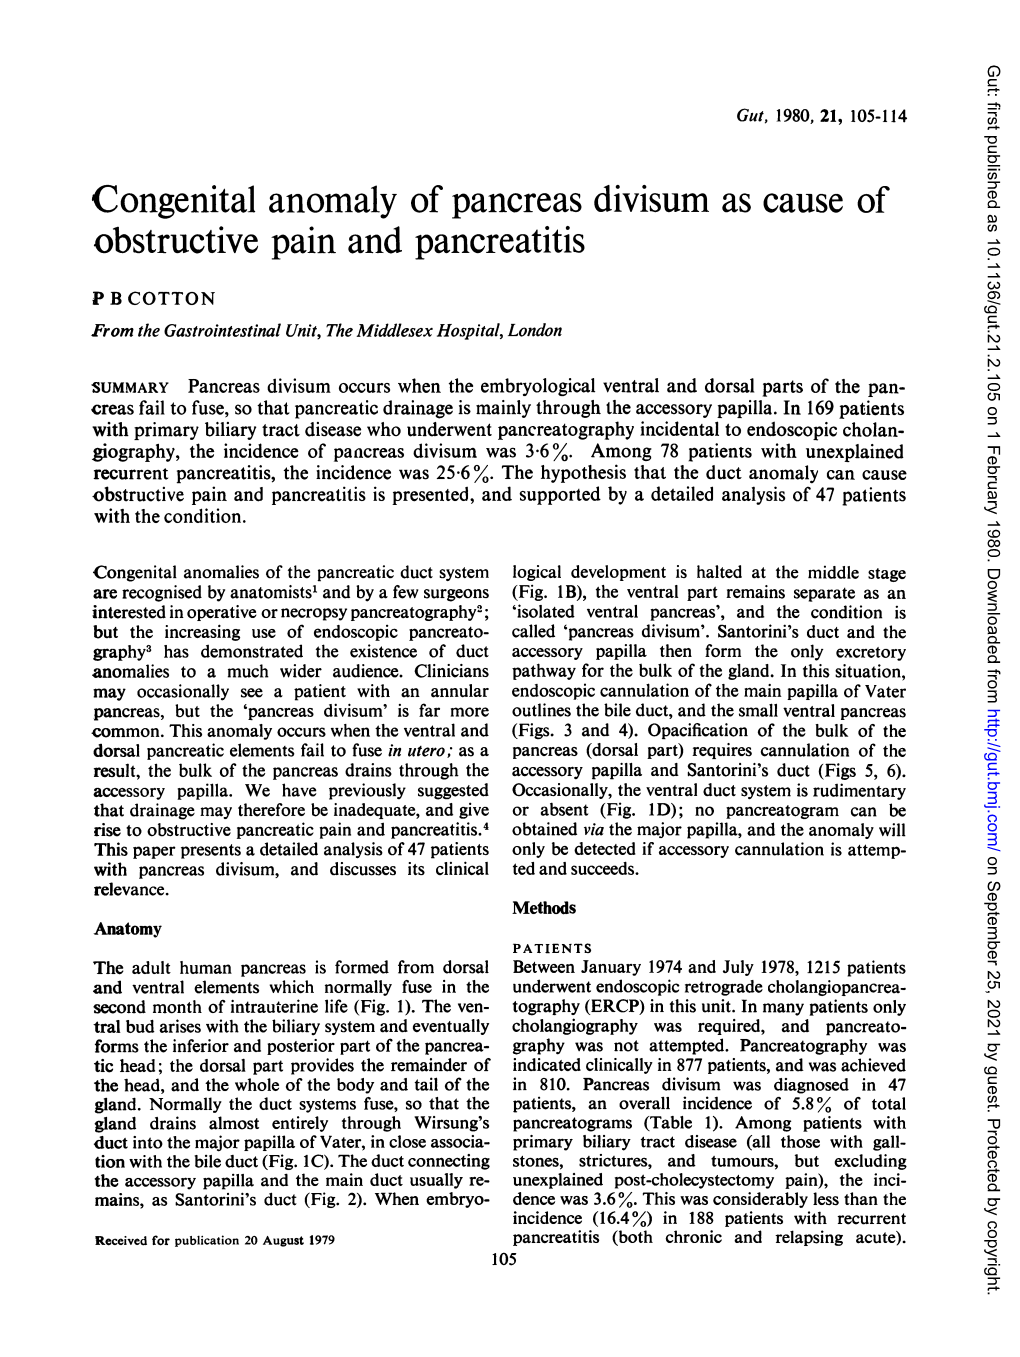 Congenital Anomaly of Pancreas Divisum As Cause of Obstructive Pain and Pancreatitis